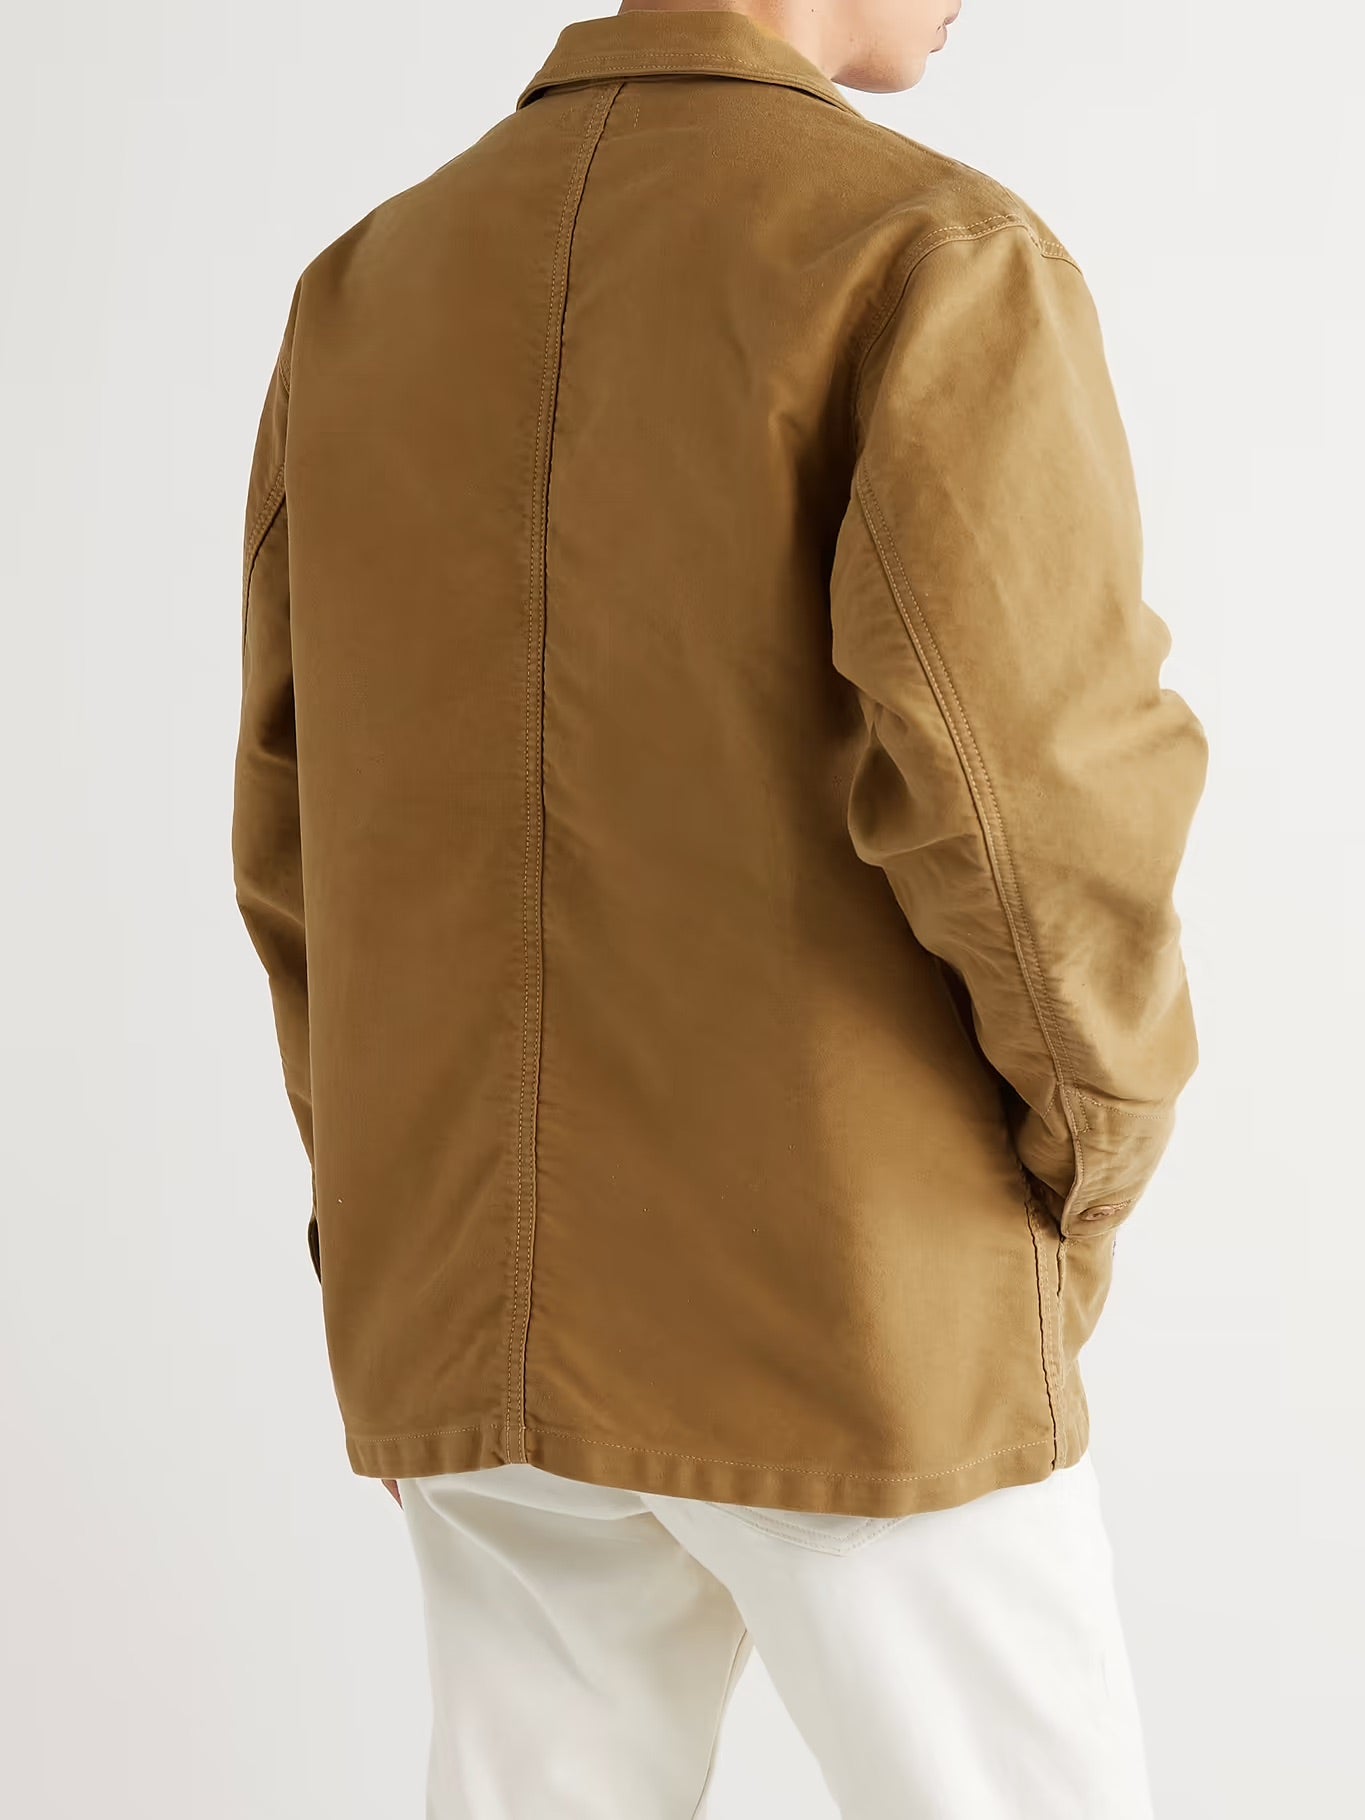 Nudie Jeans - NUDIE JEANS CARSON APPLIQUÉD ORGANIC COTTON-MOLESKIN CHORE JACKET - Rent With Thred